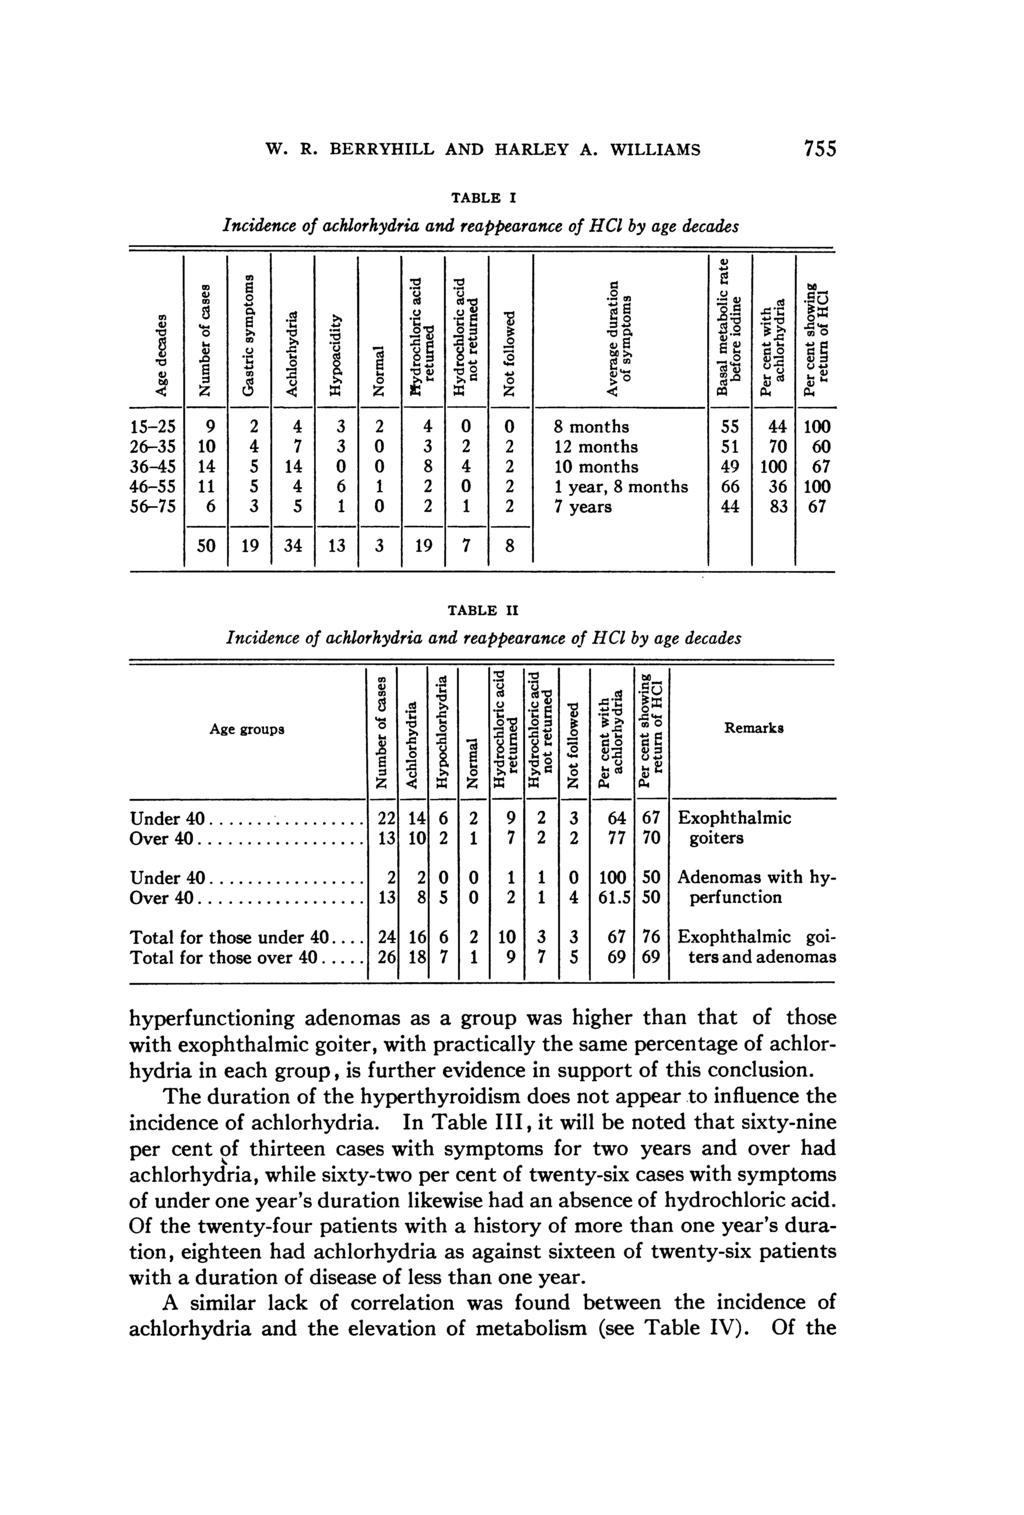 W. R. BERRYHILL AND HARLEY A. WILLIAMS 755 TABLE I Incidence of achlorhydria and reappearance of HCI by age decades 4.)~~~. 1C 000 14 0 0 8 42 04.0 10 0 bc>c ~ ~~~.